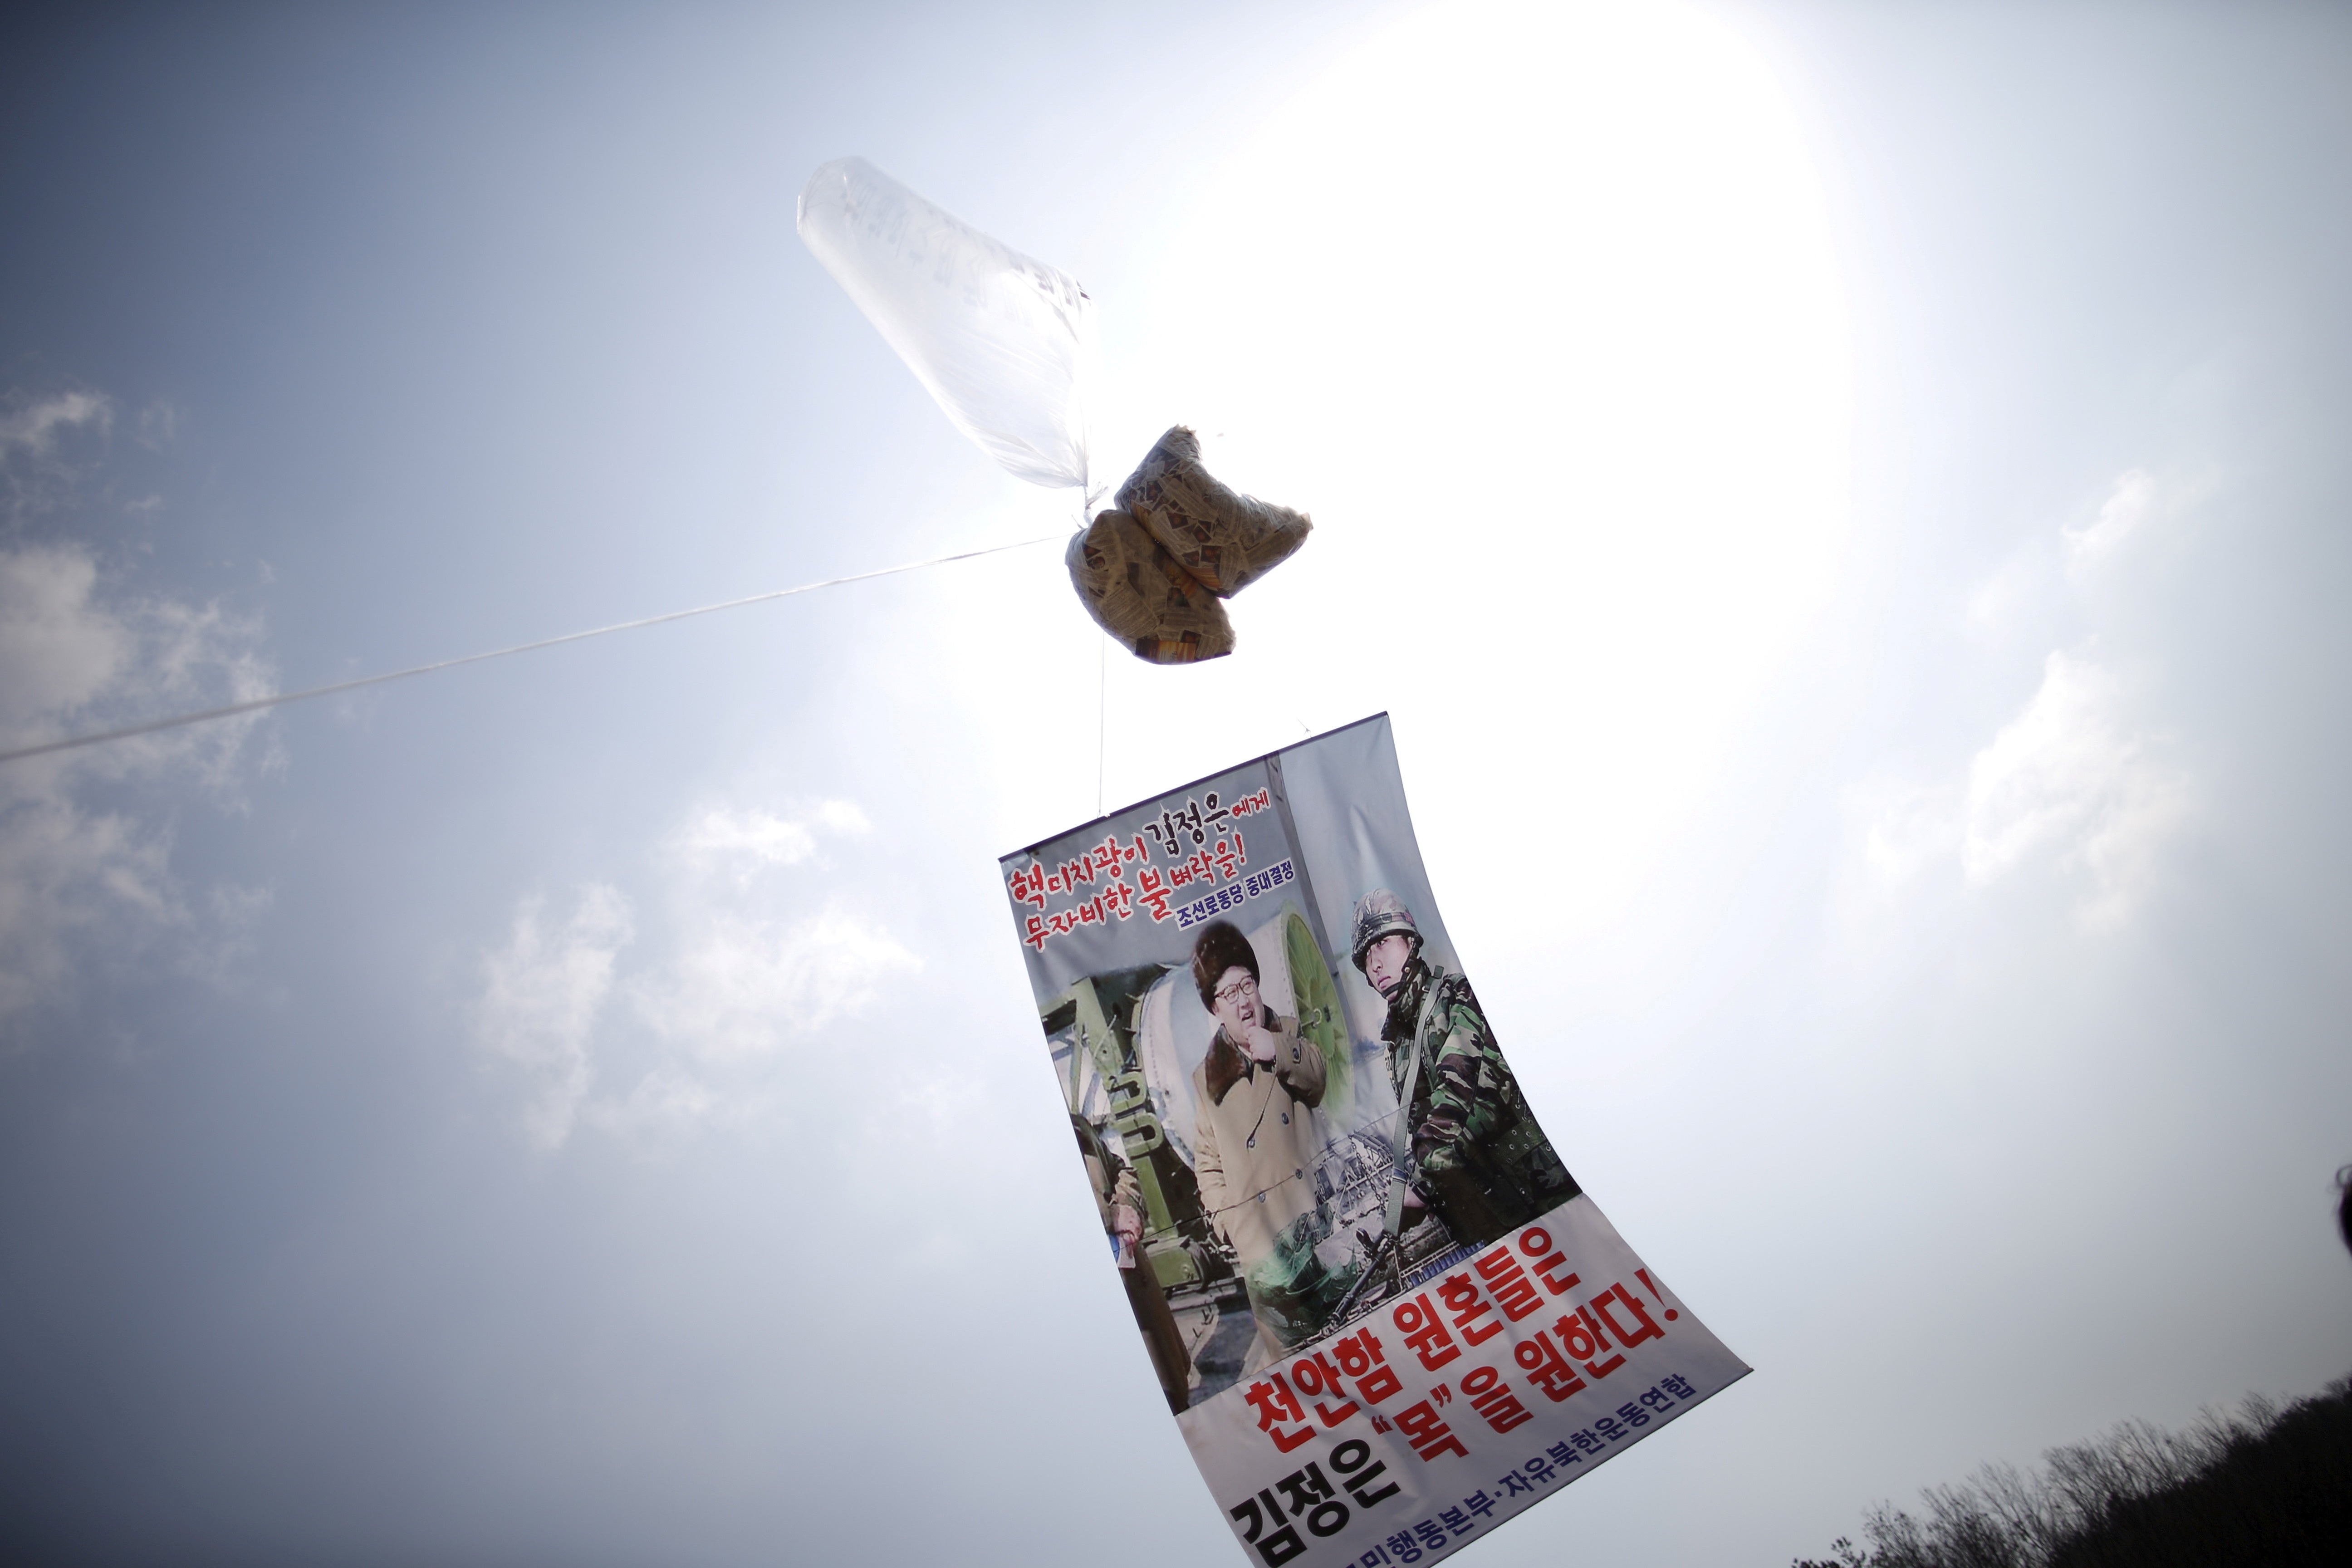 FILE PHOTO: A balloon containing leaflets denouncing North Korean leader Kim Jong Un is seen near the demilitarised zone separating the two Koreas in Paju, South Korea